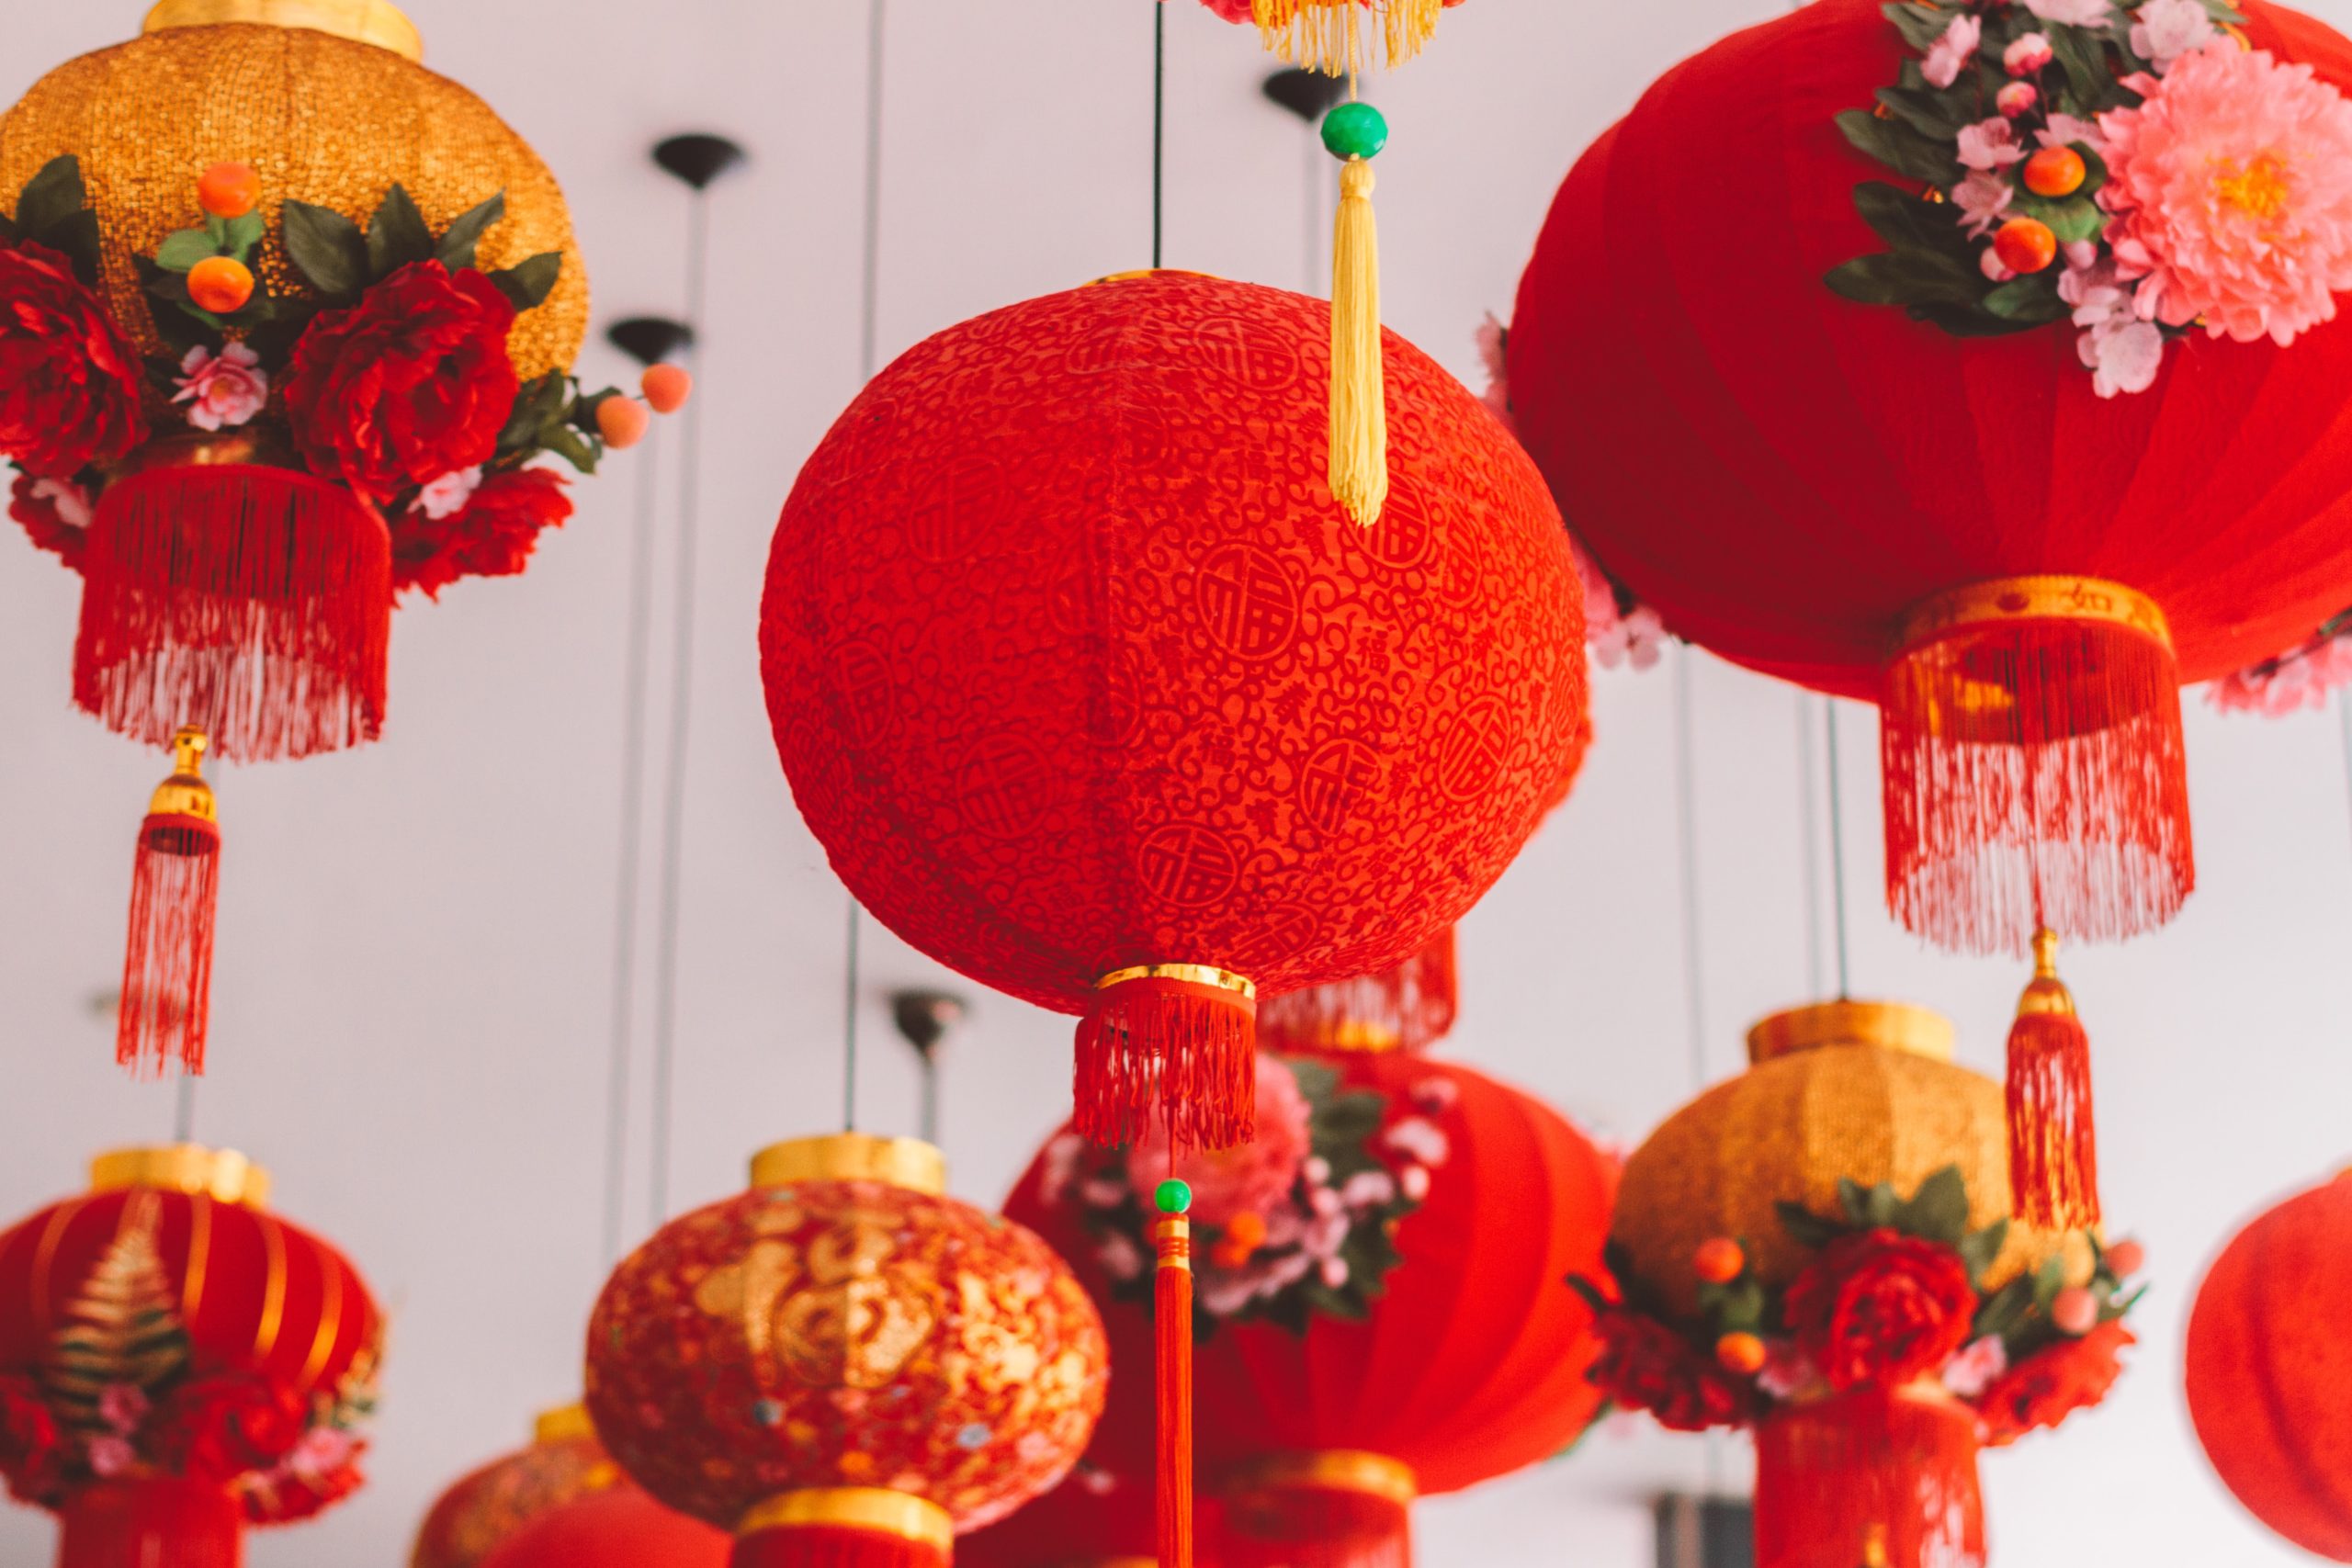 Chinese New Year Activities And Games unsplash